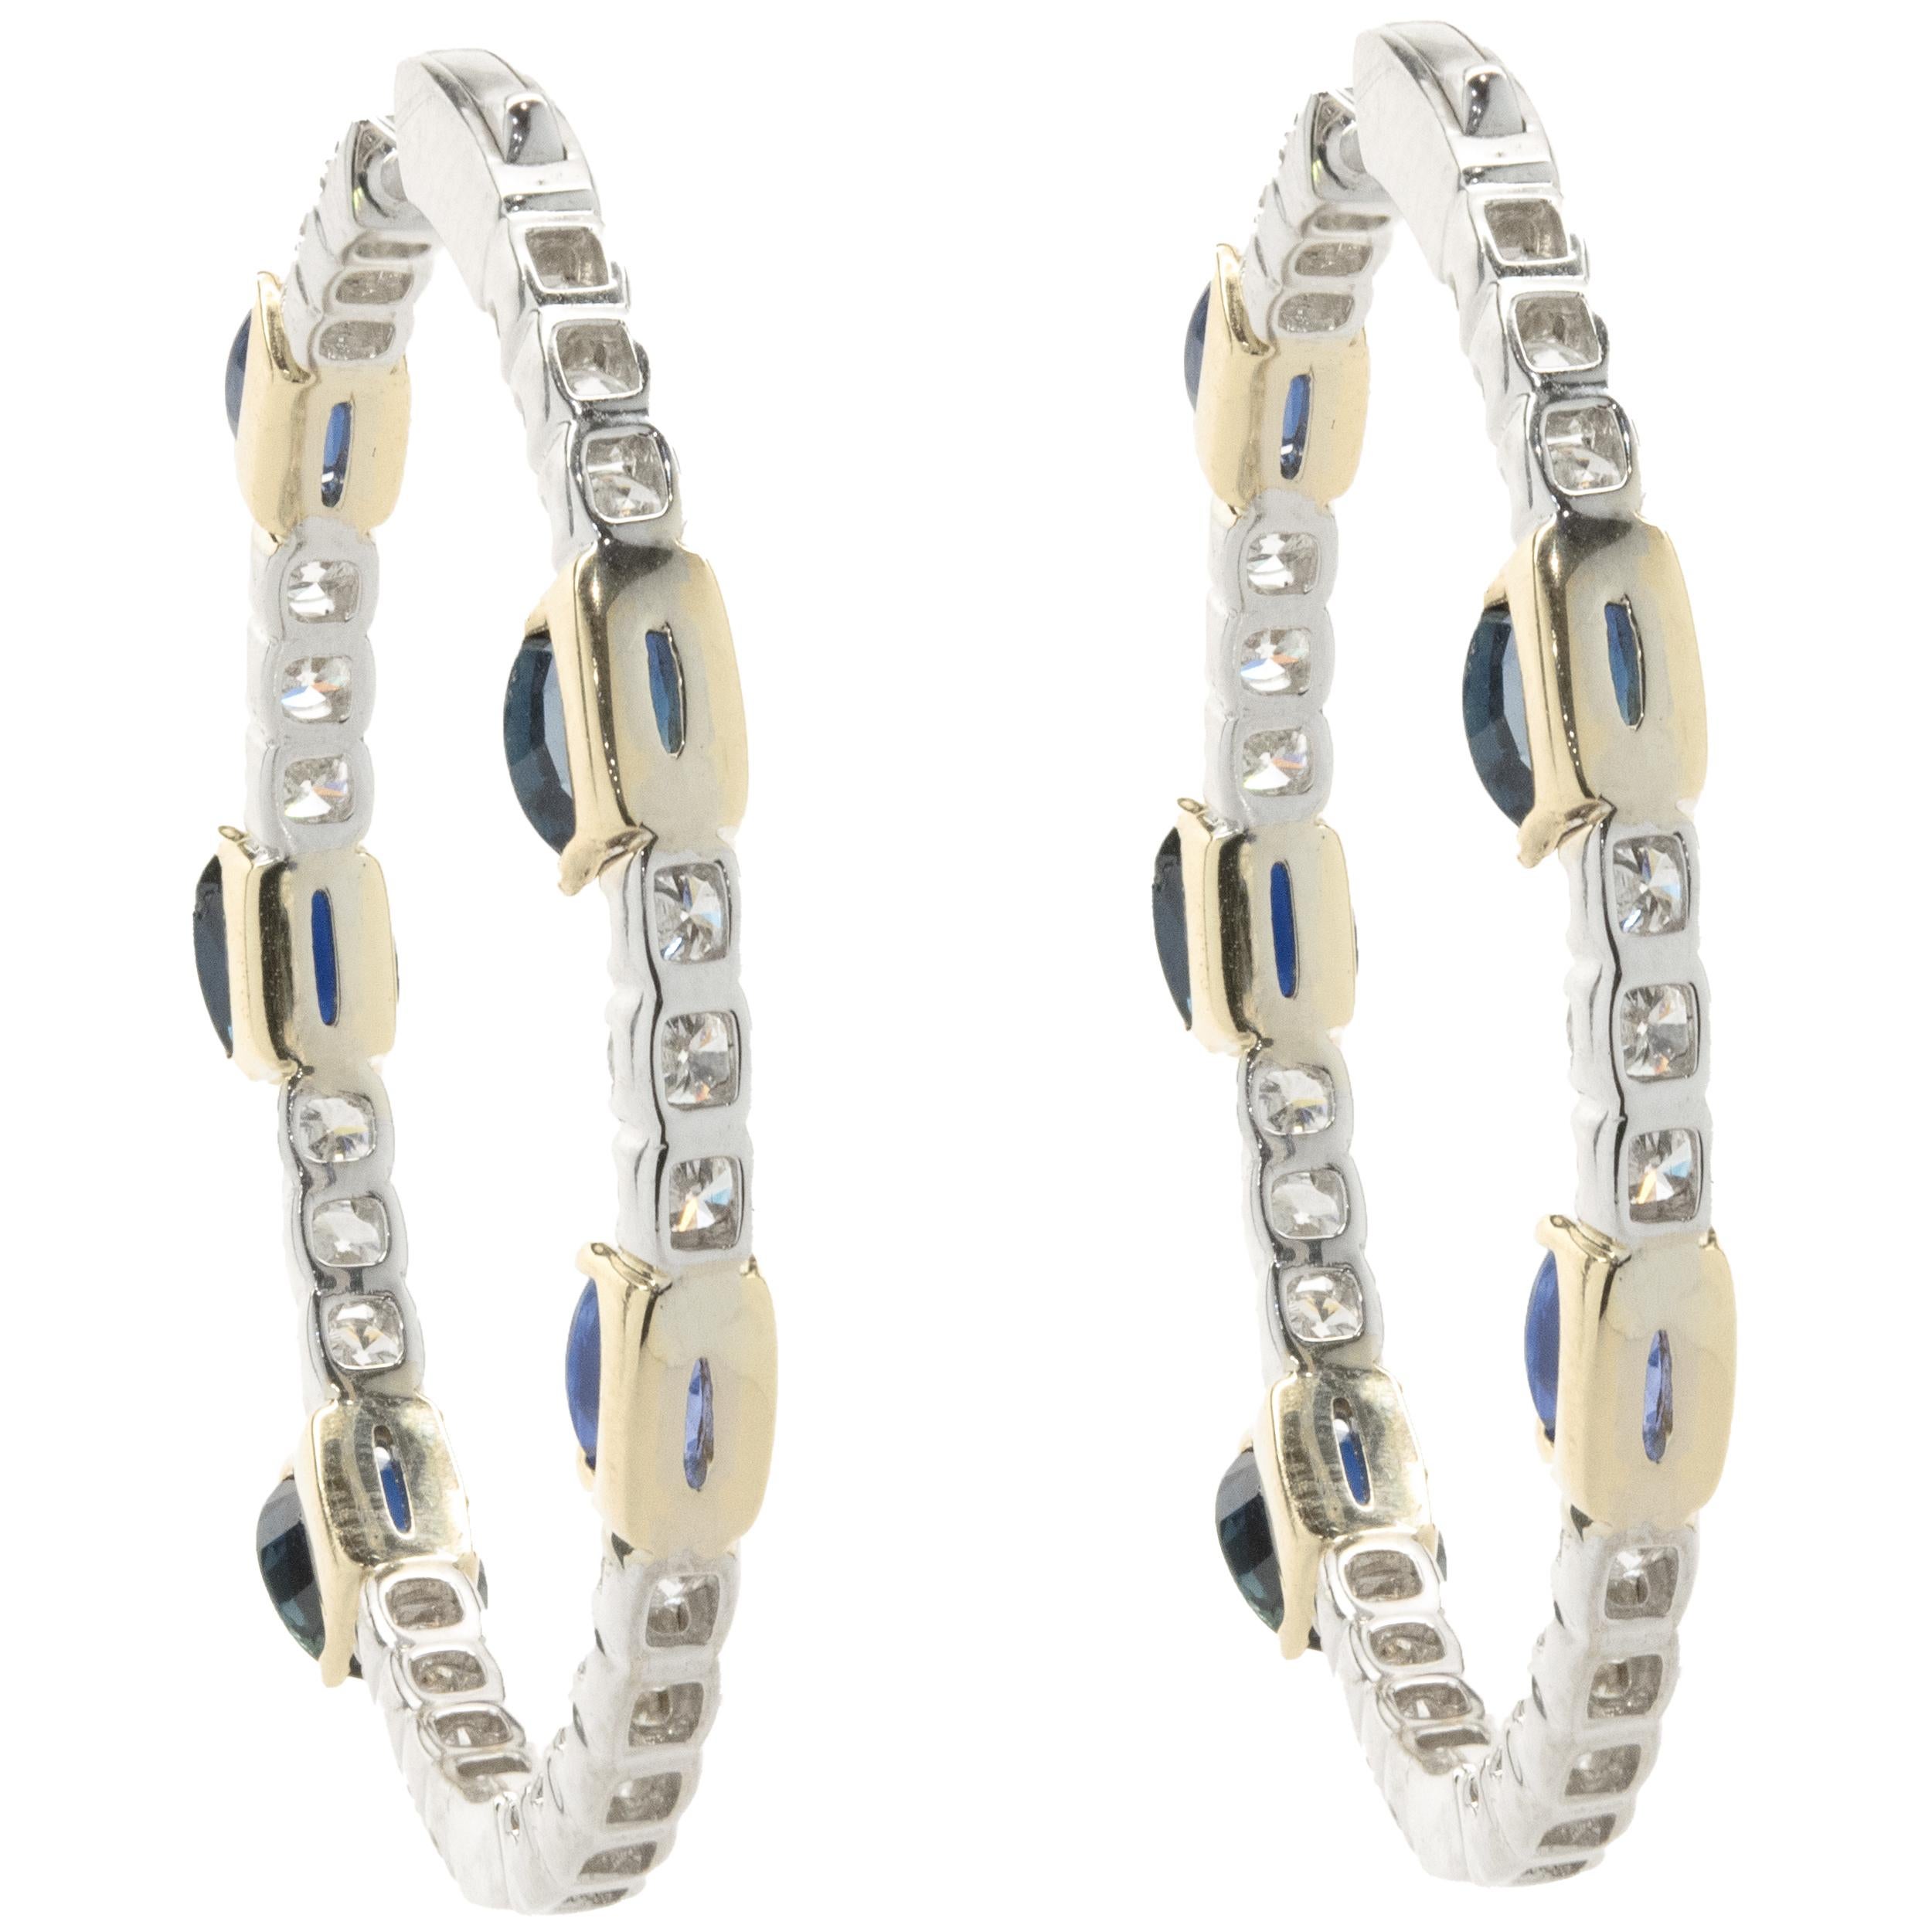 Designer: custom
Material: 14K white gold
Diamond: 48 round brilliant cut = 3.84cttw
Color: H
Clarity: SI1
Sapphire: 10 oval cut = 9.07cttw
Dimensions: earrings measure 44mm
Fastenings: posts with snap backs
Weight: 14.85 grams
